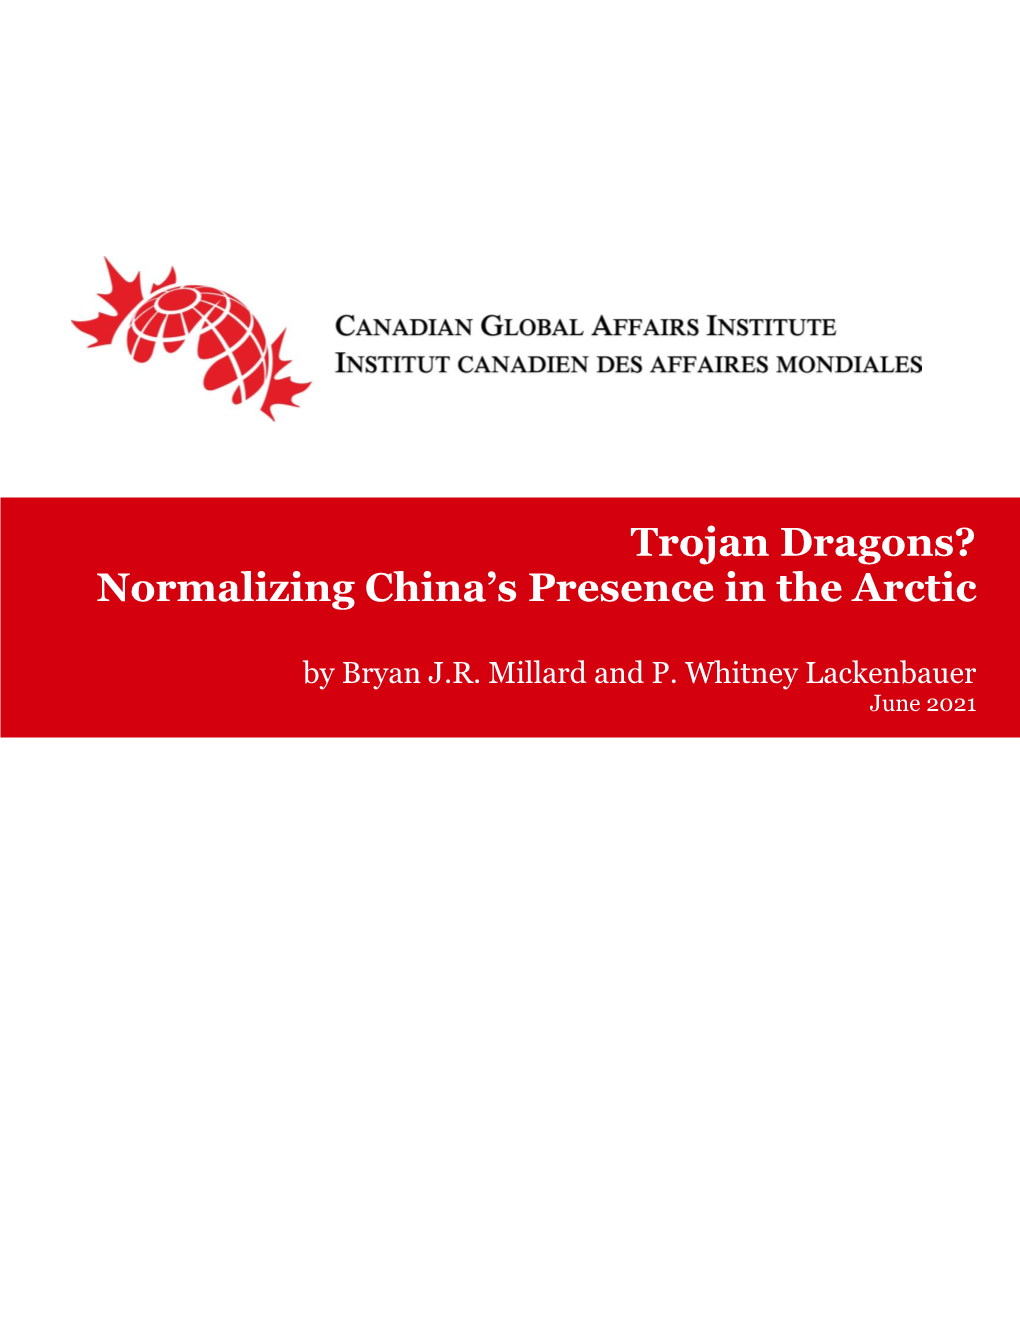 Trojan Dragons? Normalizing China's Presence in the Arctic